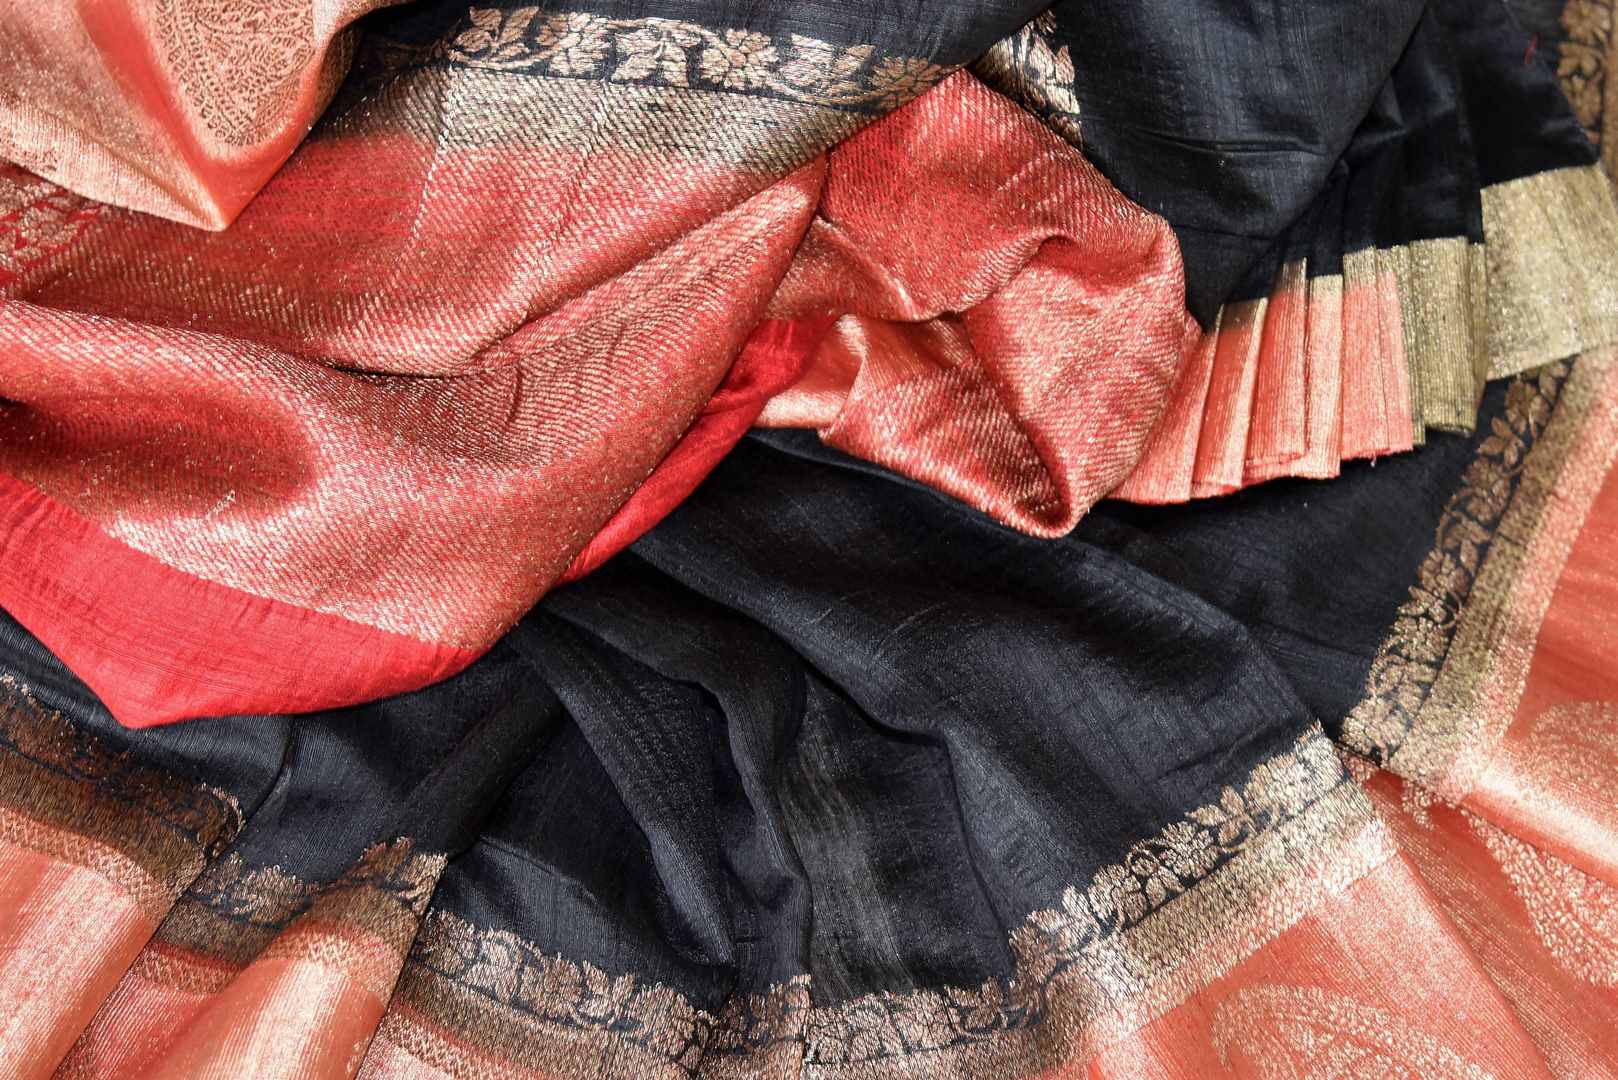 Buy black tussar Benarasi sari online in USA with red zari border and pallu. Make an elegant ethnic fashion statement at parties, weddings and special occasions with a splendid collection of Indian designer sarees, Banarasi saris, handloom saris from Pure Elegance Indian clothing store in USA or shop online.-details